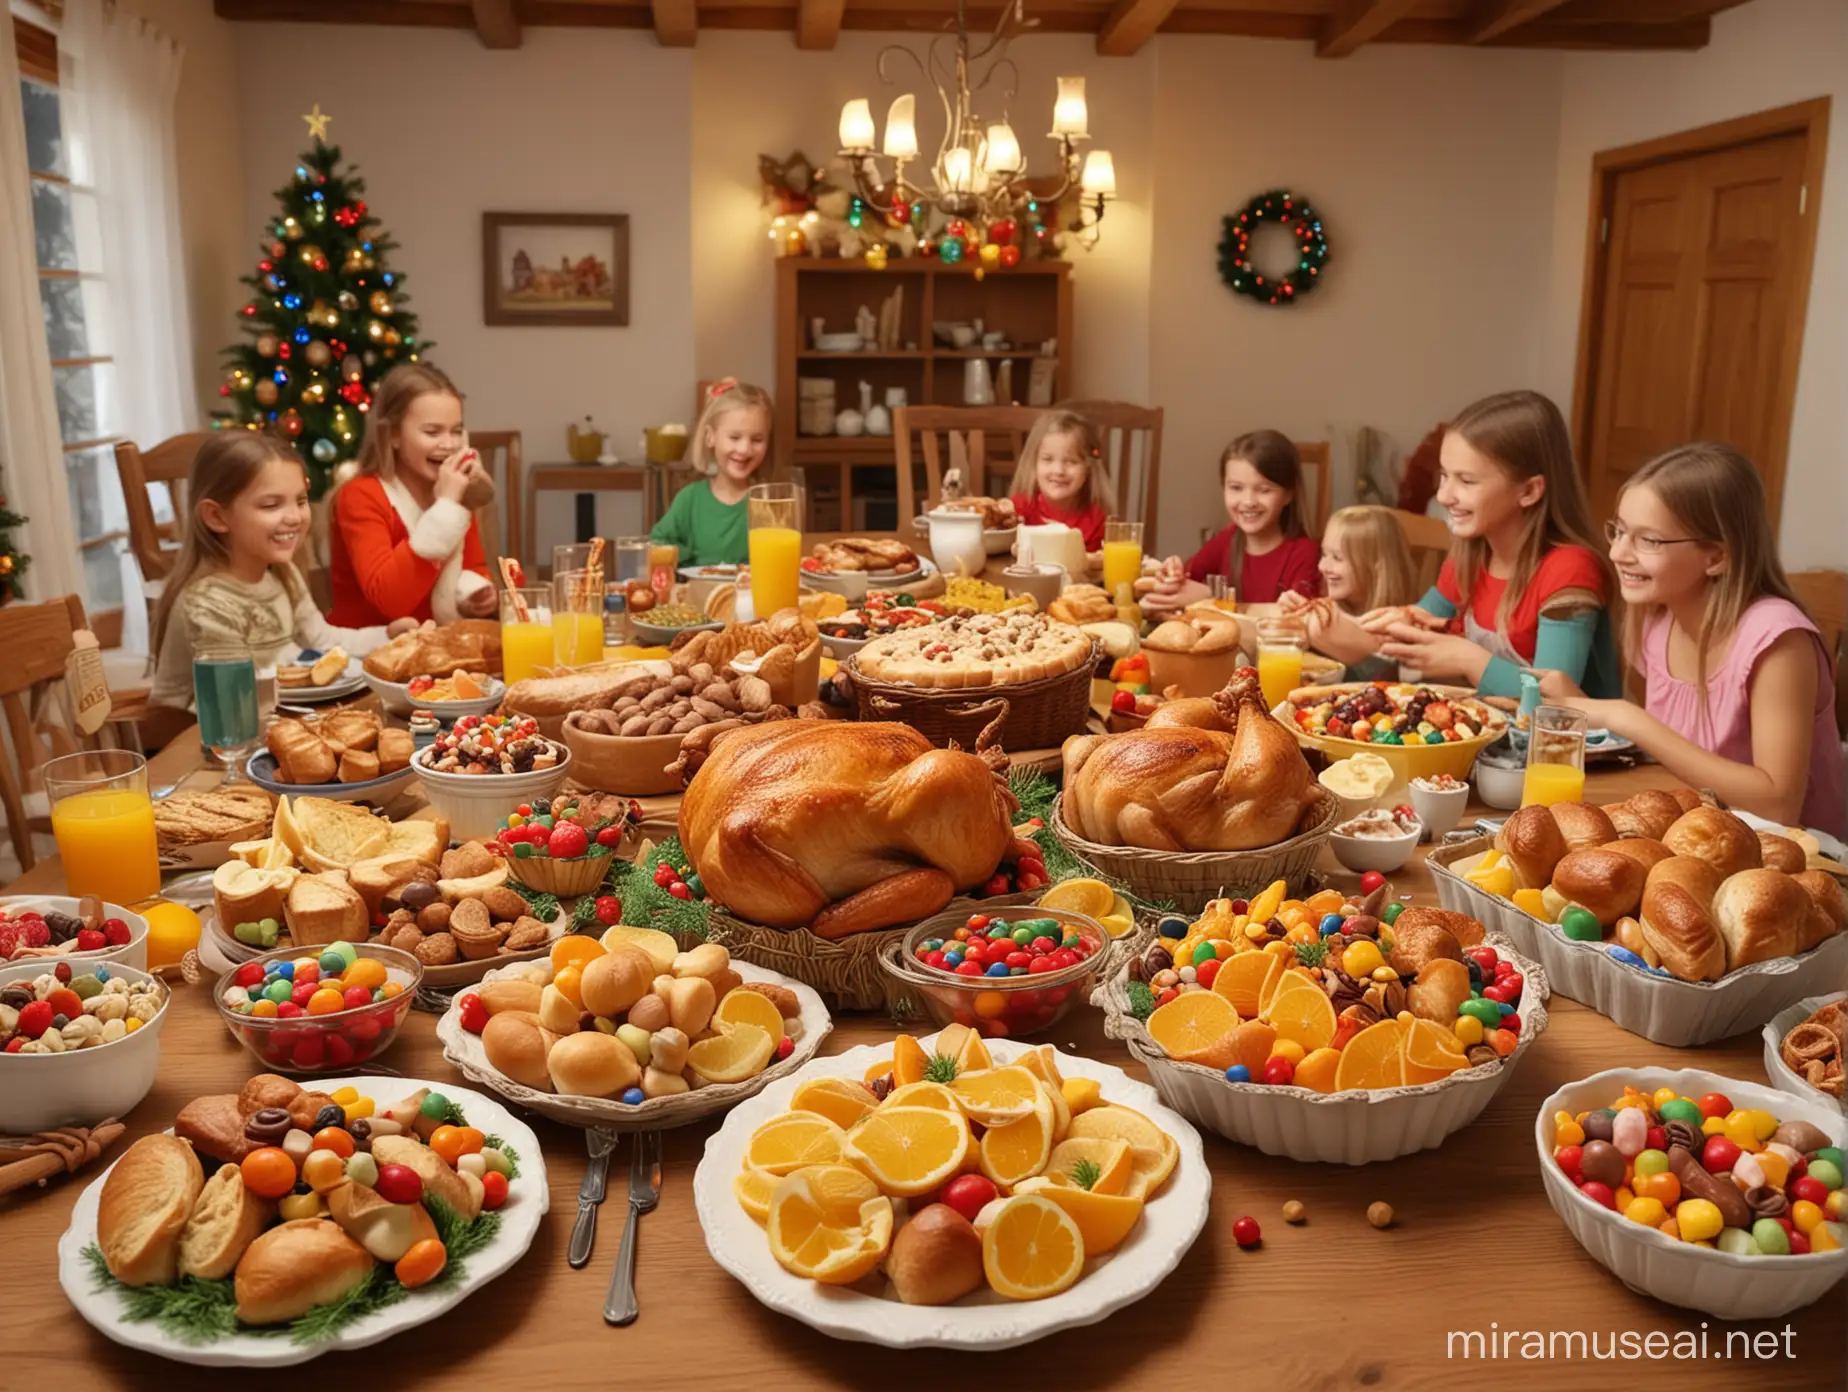 3D view of a wooden table with christmas feast, roasted chicken, breads of different kinds in baskets, butter, orange juice in glasses, orange juice in a jar, cakes with colourful toppings, candies, assorted chocolates, family with 2 teenaged girls and young cute boy excited, family having feast, everybody in family has a smile on face, cosy house of wood, well lit, well decorated